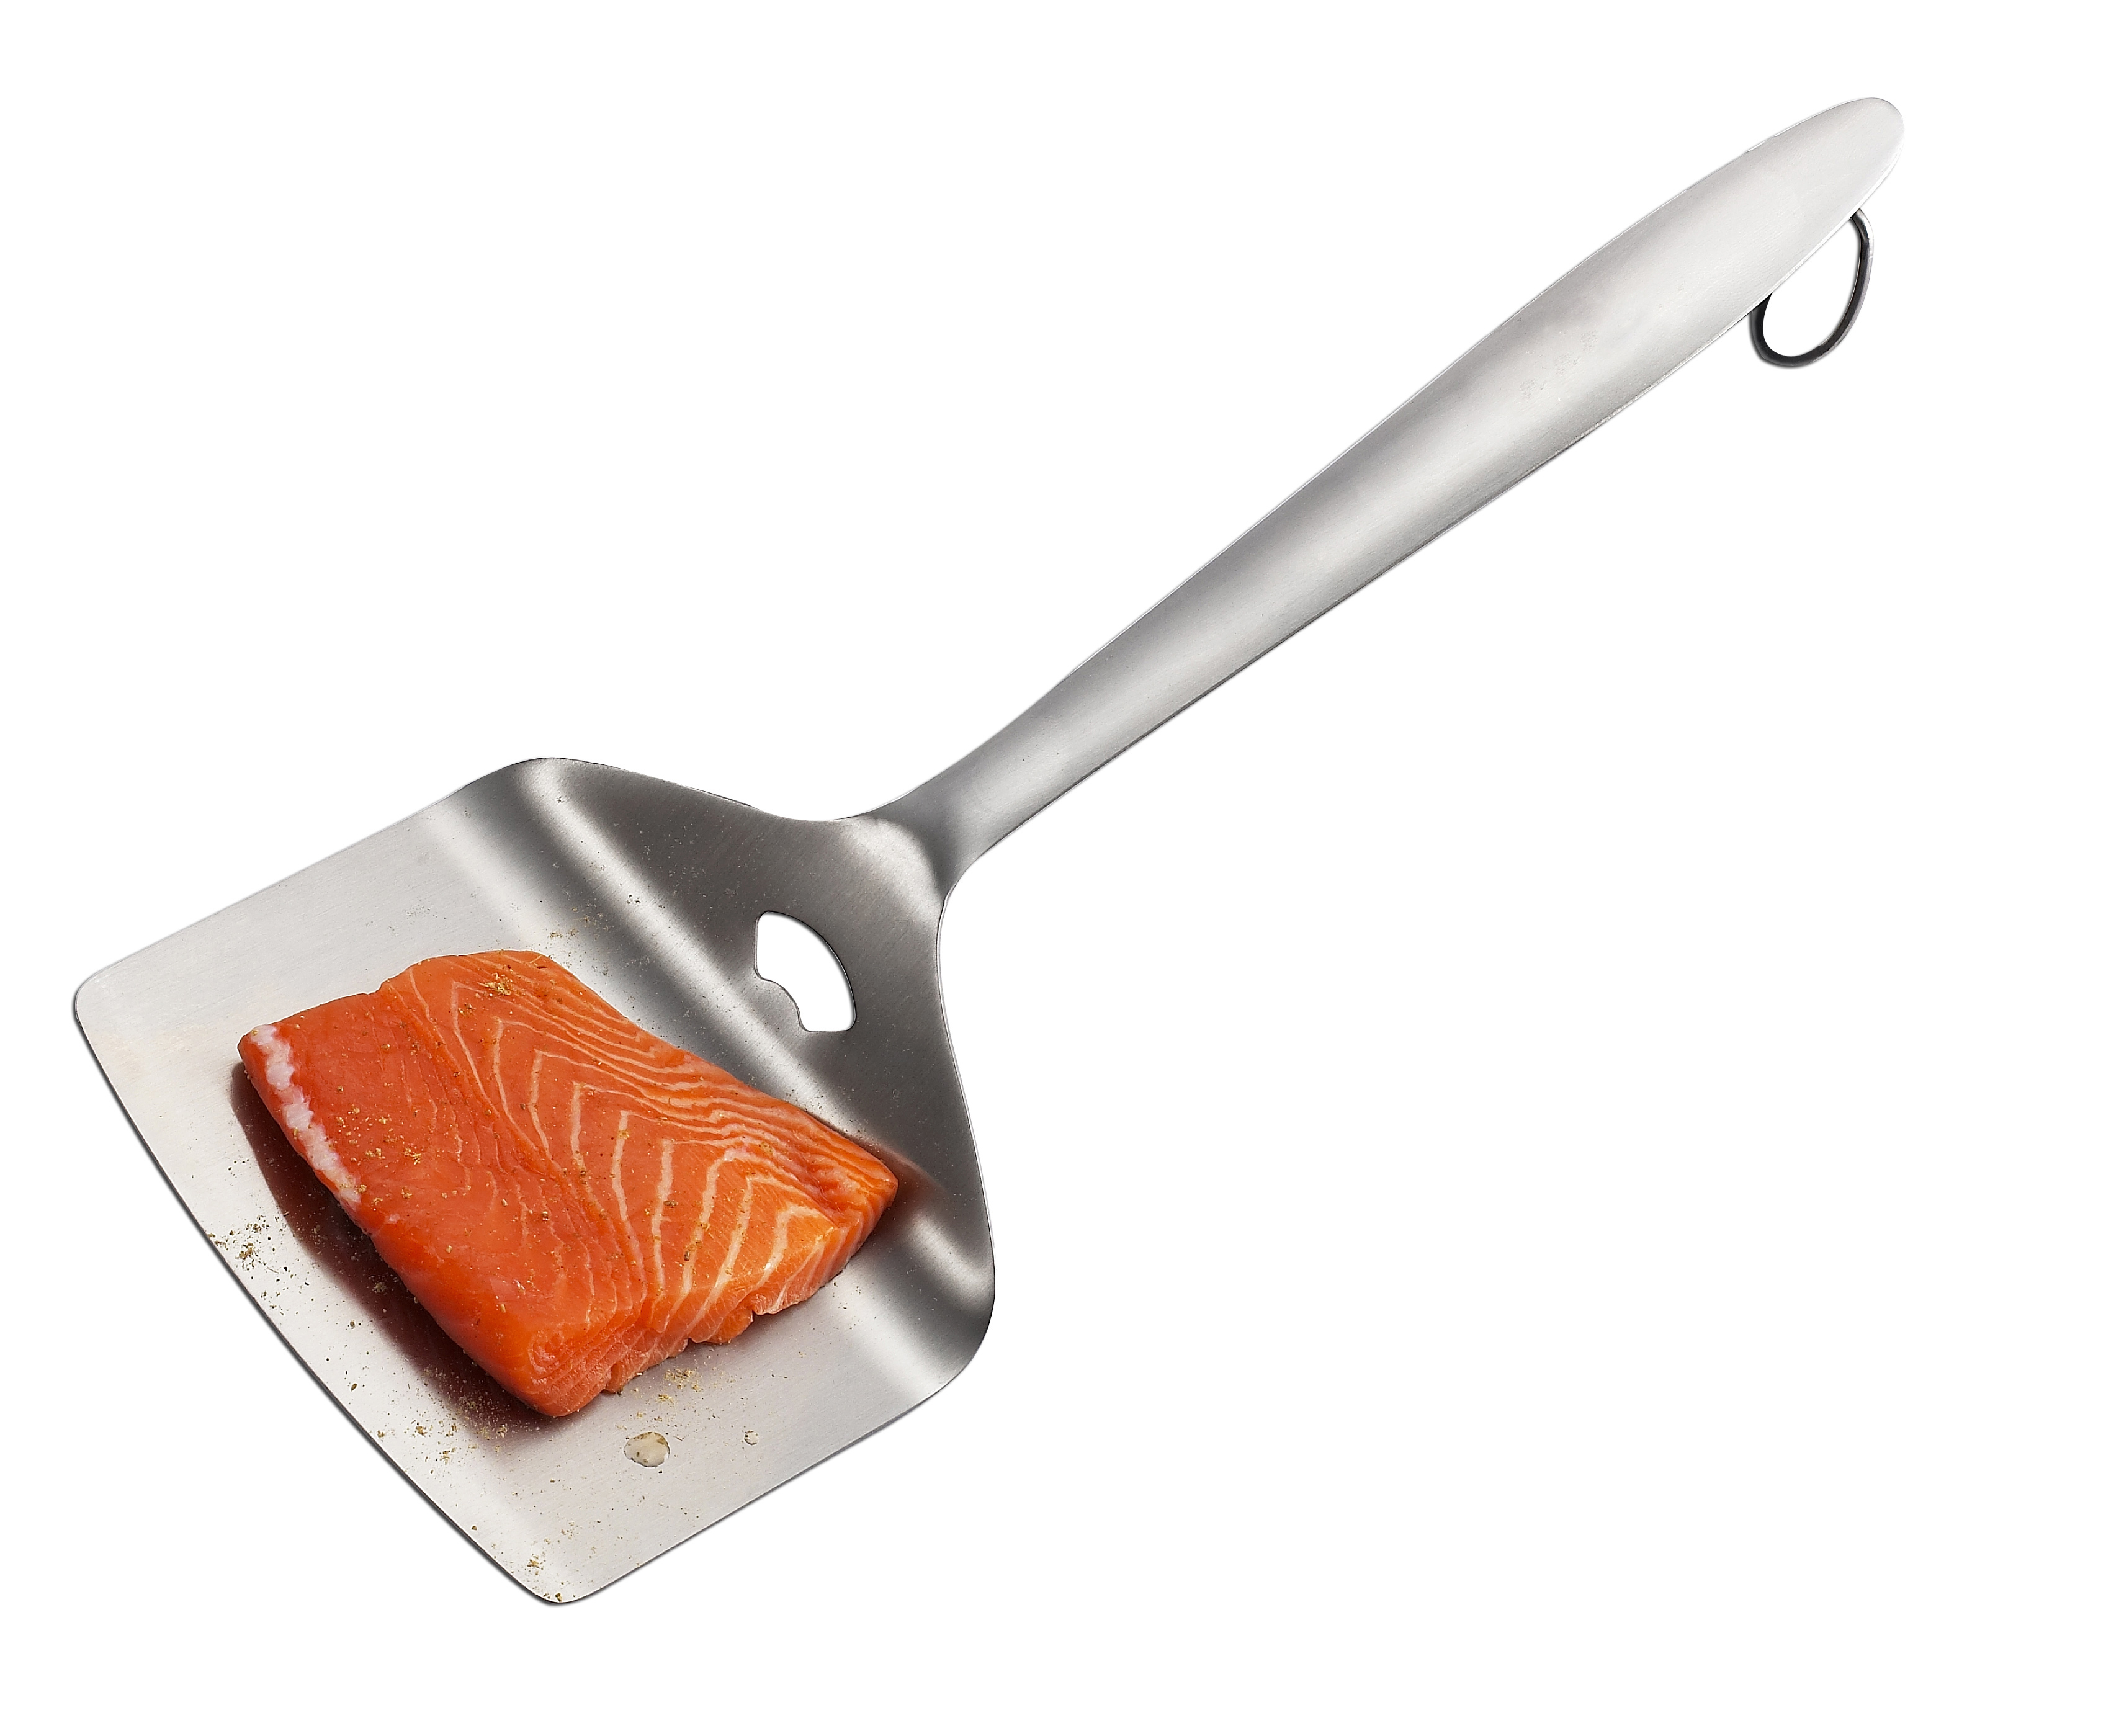 BBQ 880006C 7-Inch Wide Fish Turner Slotted Spatula, Stainless Steel